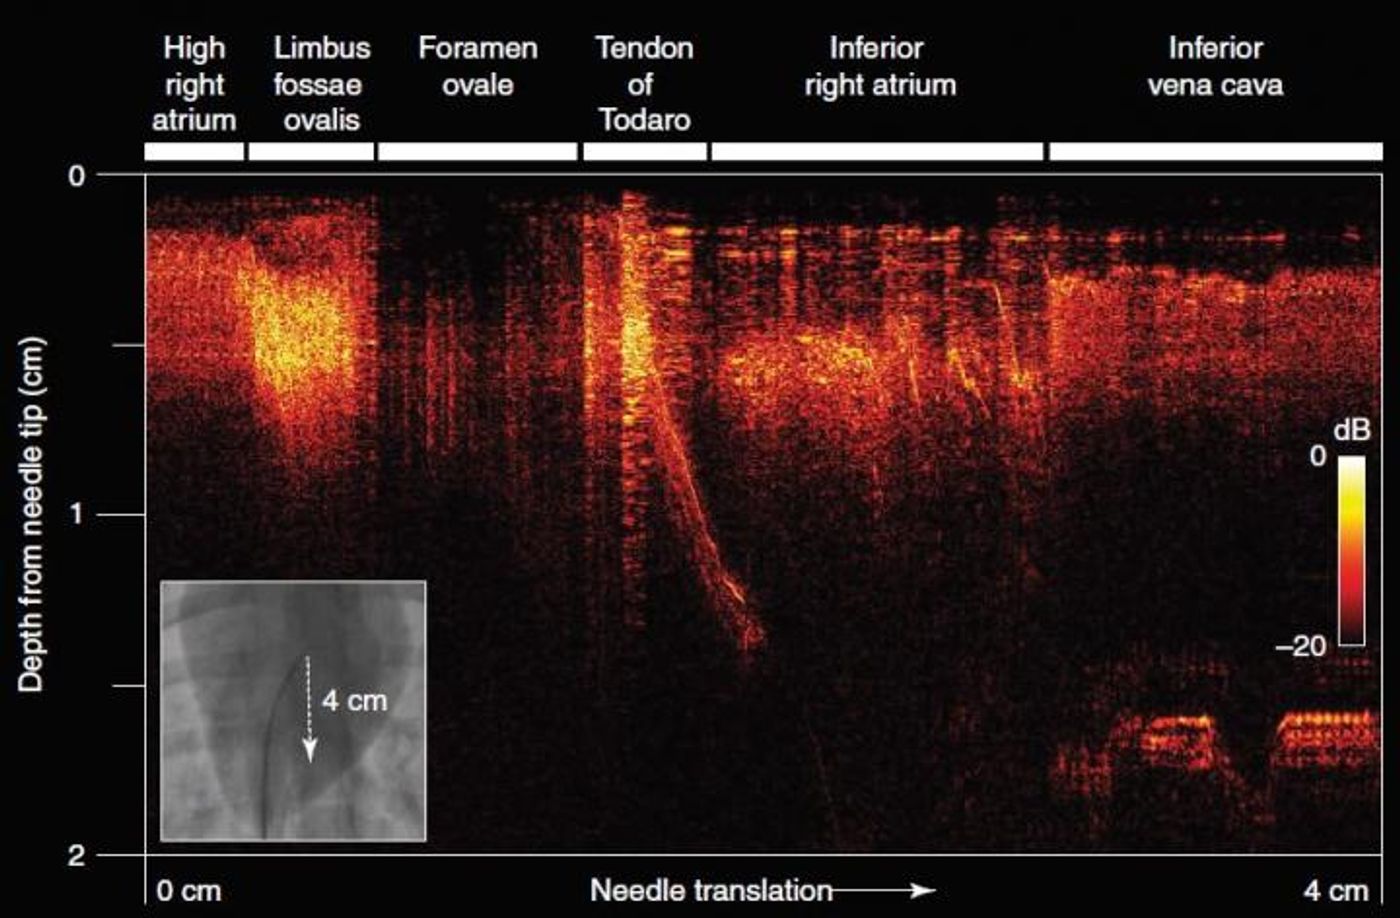 Two-dimensional all-optical ultrasound imaging (B-Mode) acquired during the manual translation of the needle tip across a distance of 4 cm. Credit: Finlay et al.